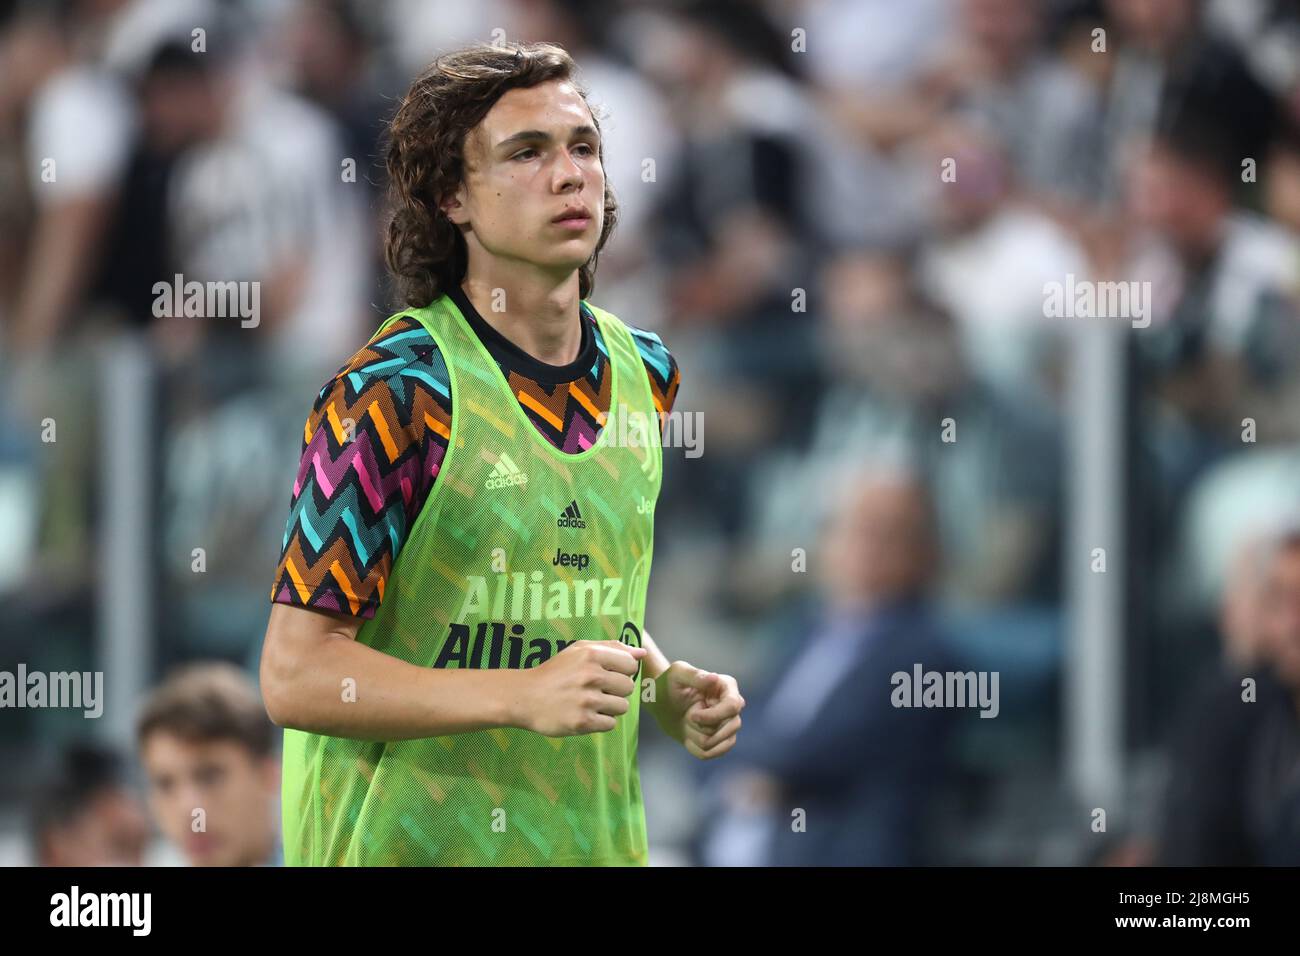 Turin, Italy. May, 16 2022, Martin Palumbo of Juventus Fc  during warm up before  the Serie A match between Juventus Fc and Ss Lazio at Allianz Stadium on May, 16 2022 in Turin, Italy. Stock Photo